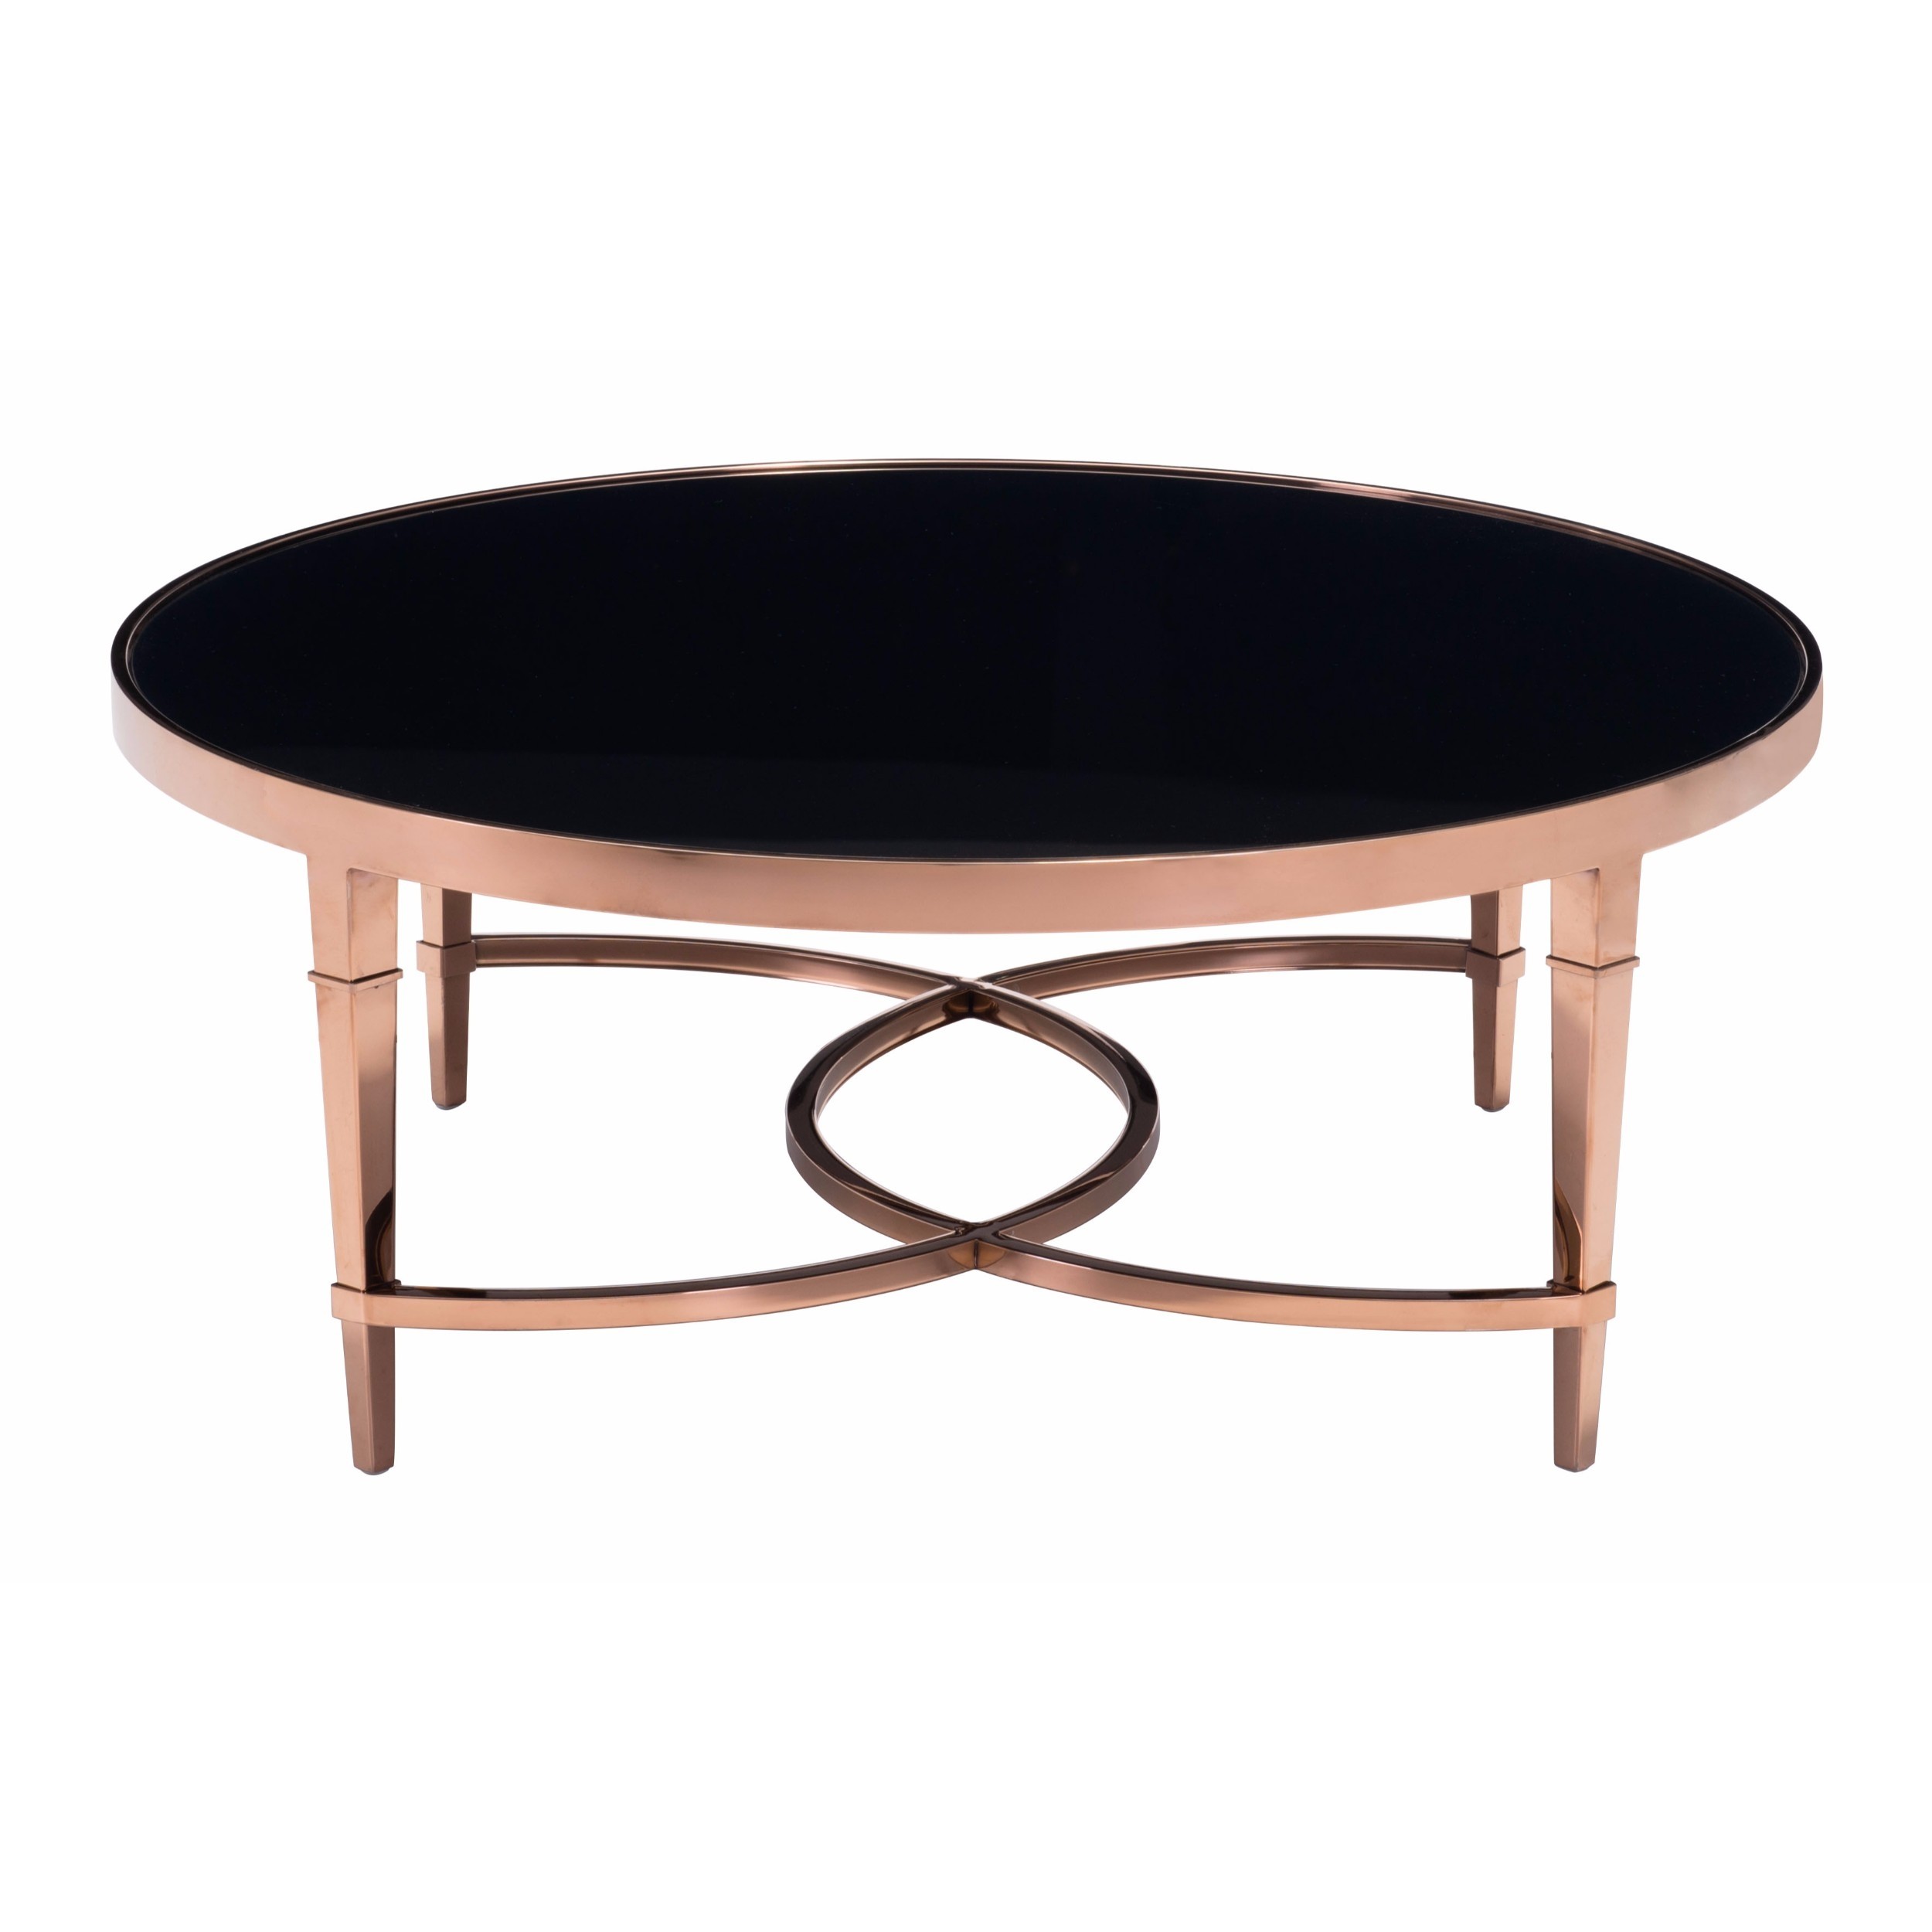 elite coffee table tables accent furniture and sets outdoor montrez gold apartment bronze glass lucite pedestal rattan waterproof cover for garden chairs round toronto overhanging